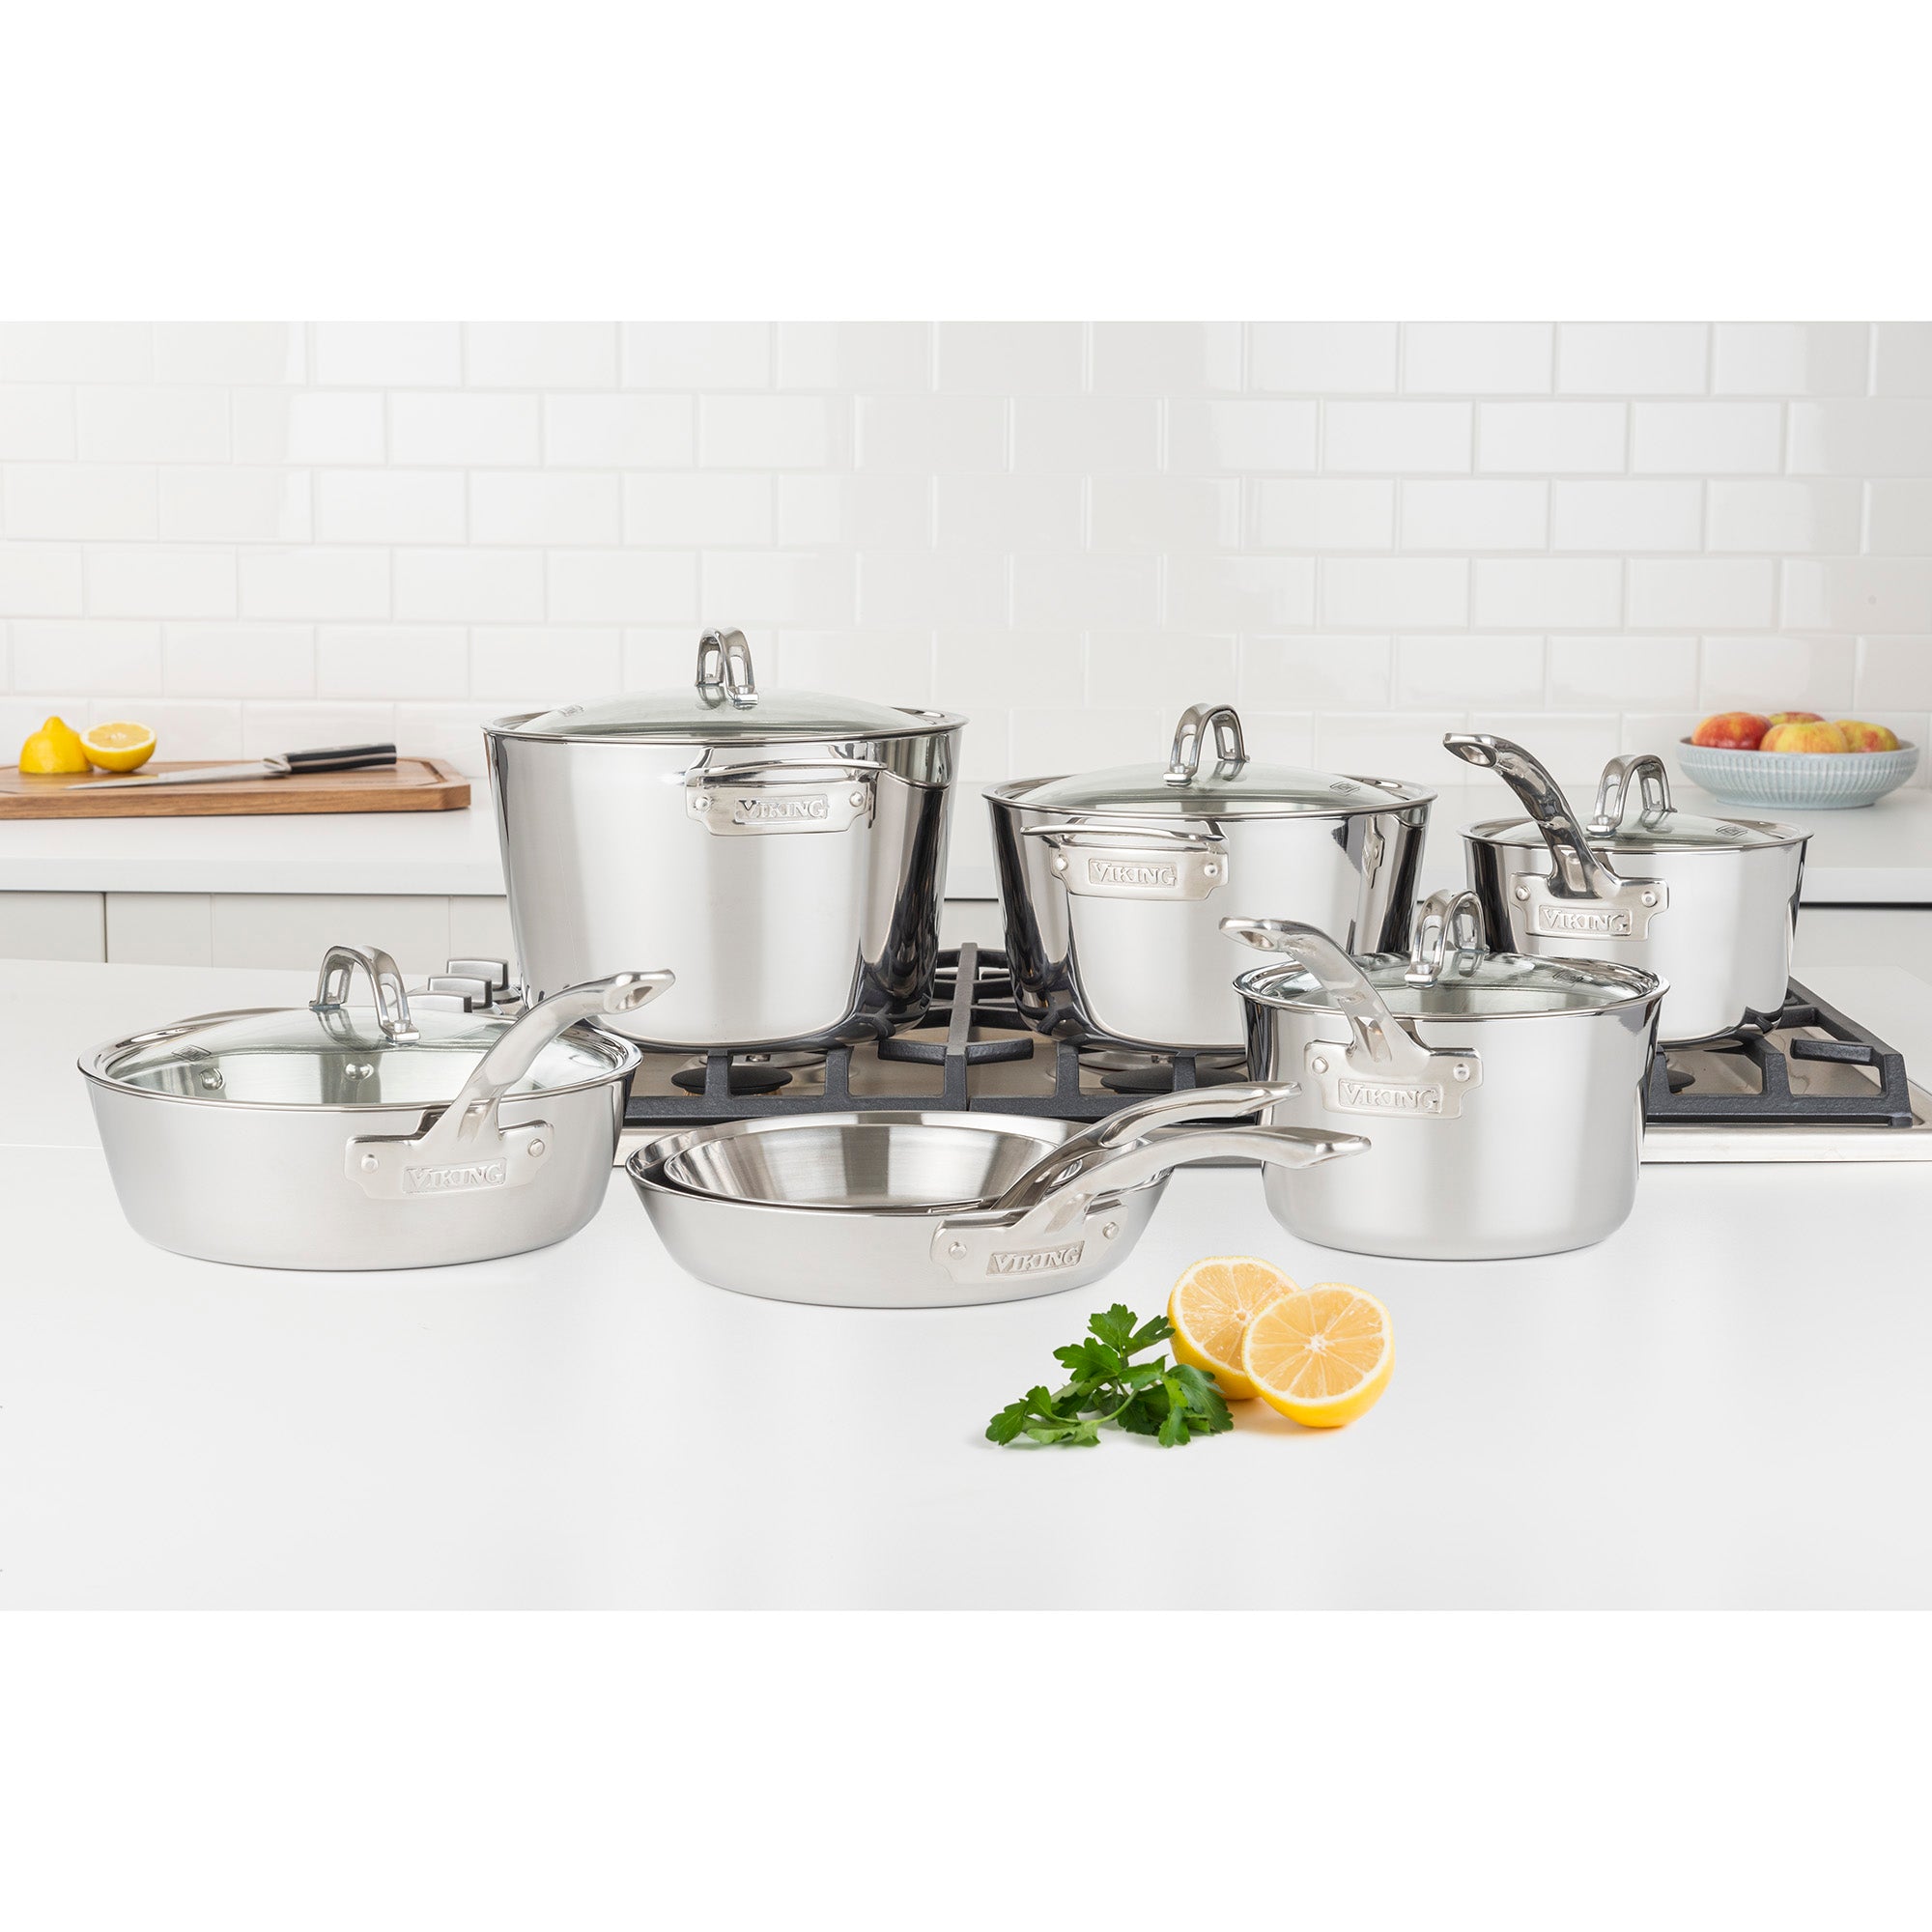 Viking Contemporary 3-Ply 12 Piece Cookware Set with Glass Lids